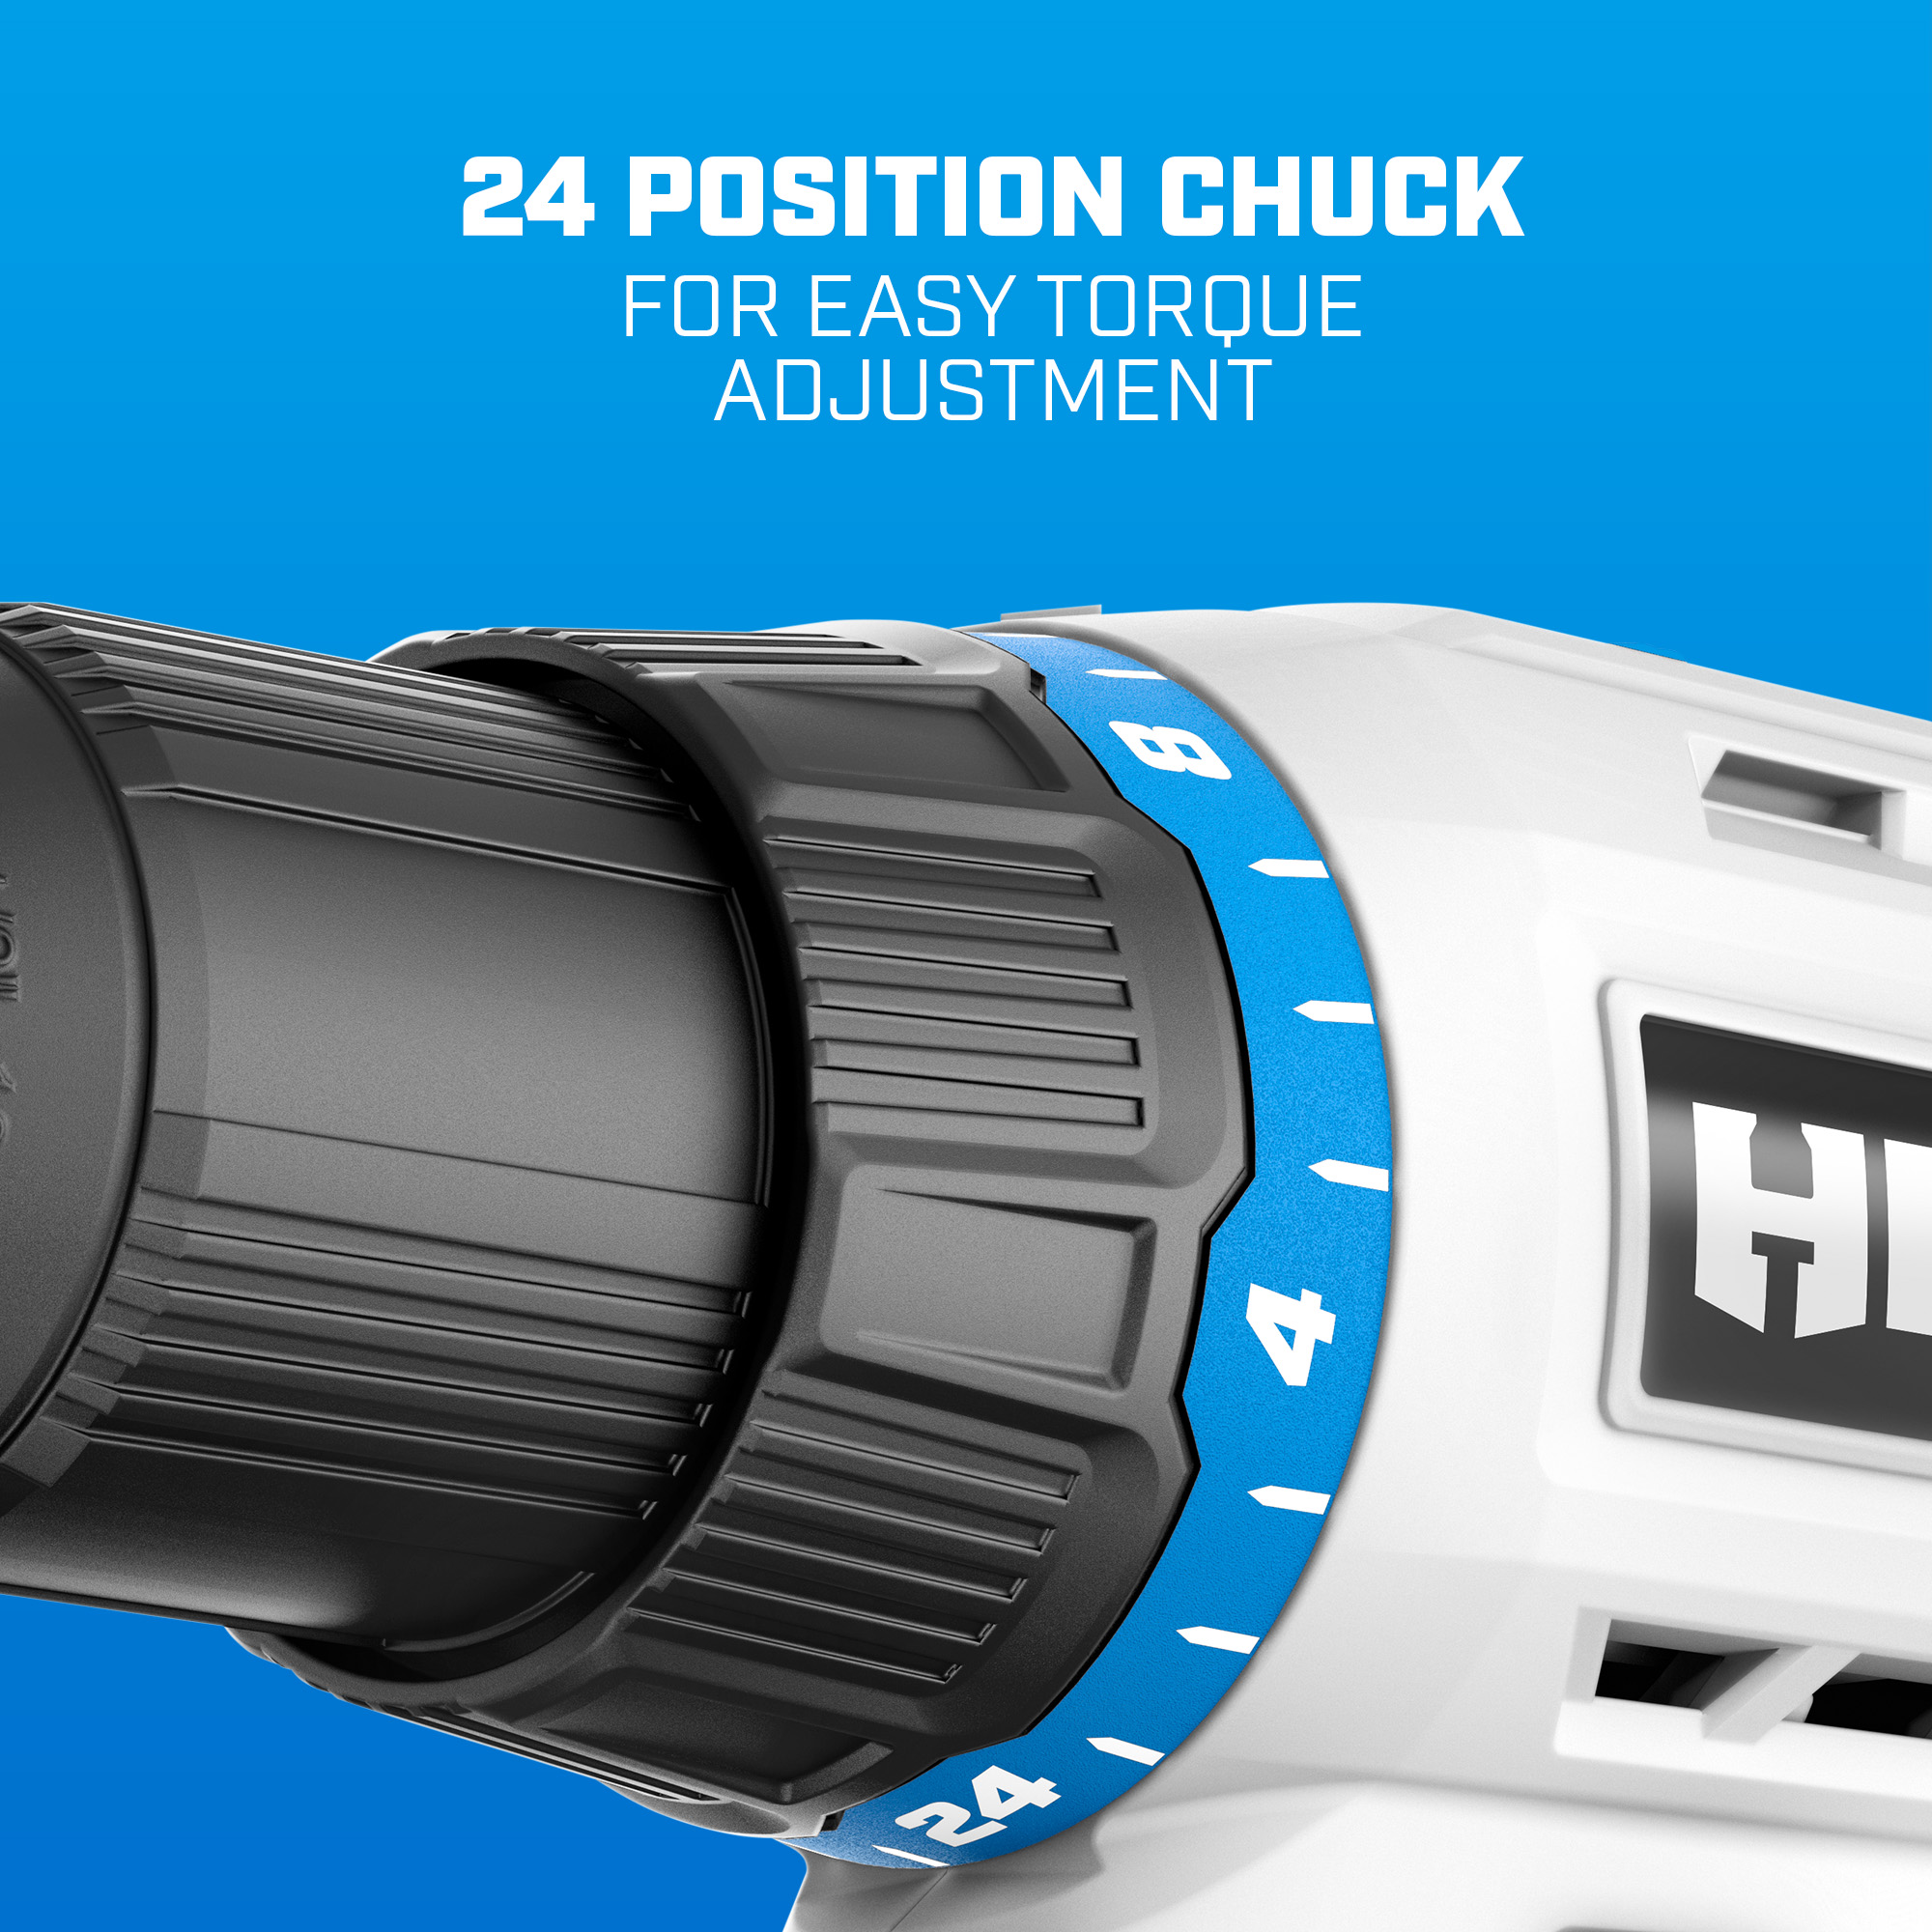 24 position clutch for easy torque adjustment